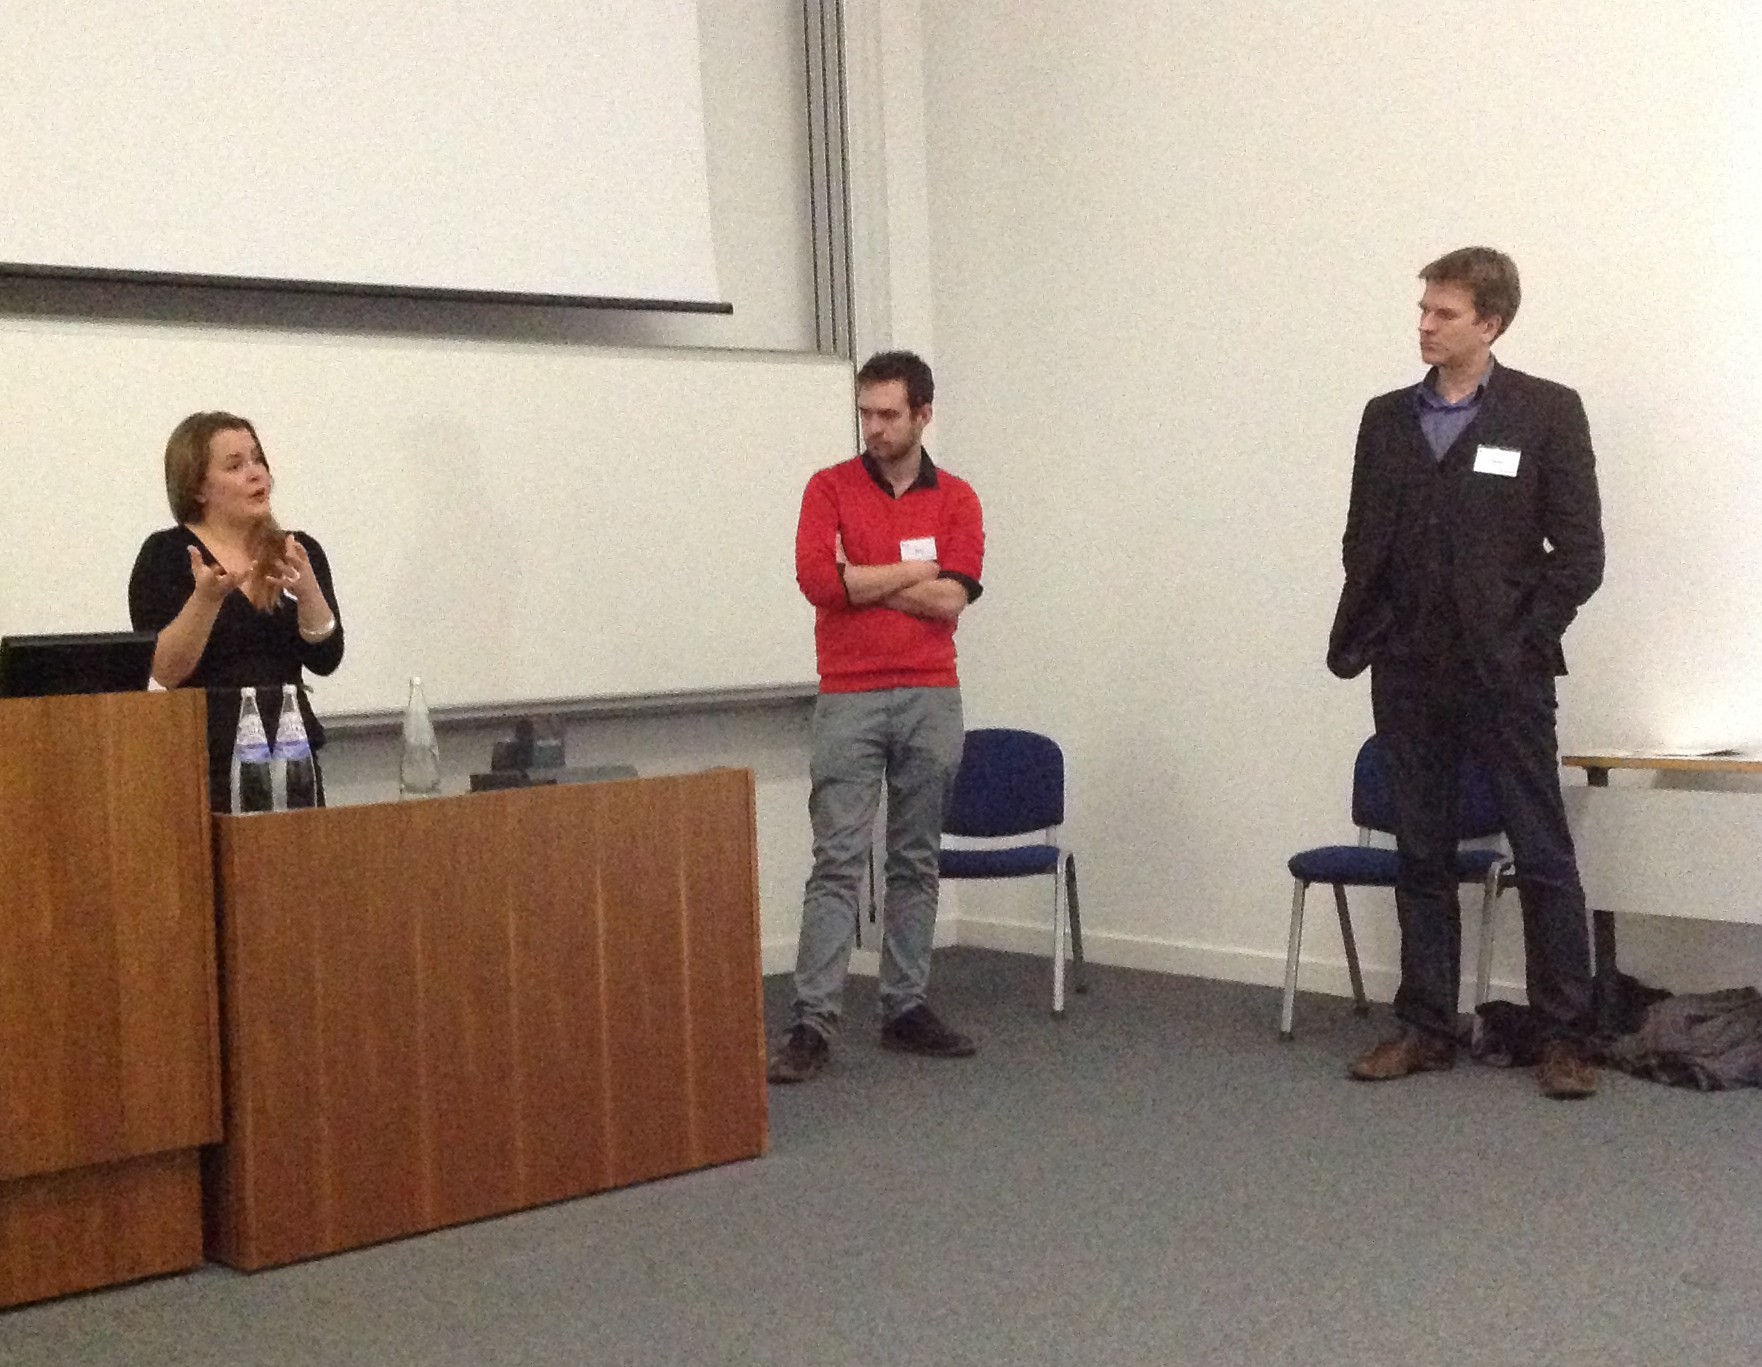 The HtV Team presentation. (From left: Angela Woods, Ben Alderson-Day and Charles Fernyhough)